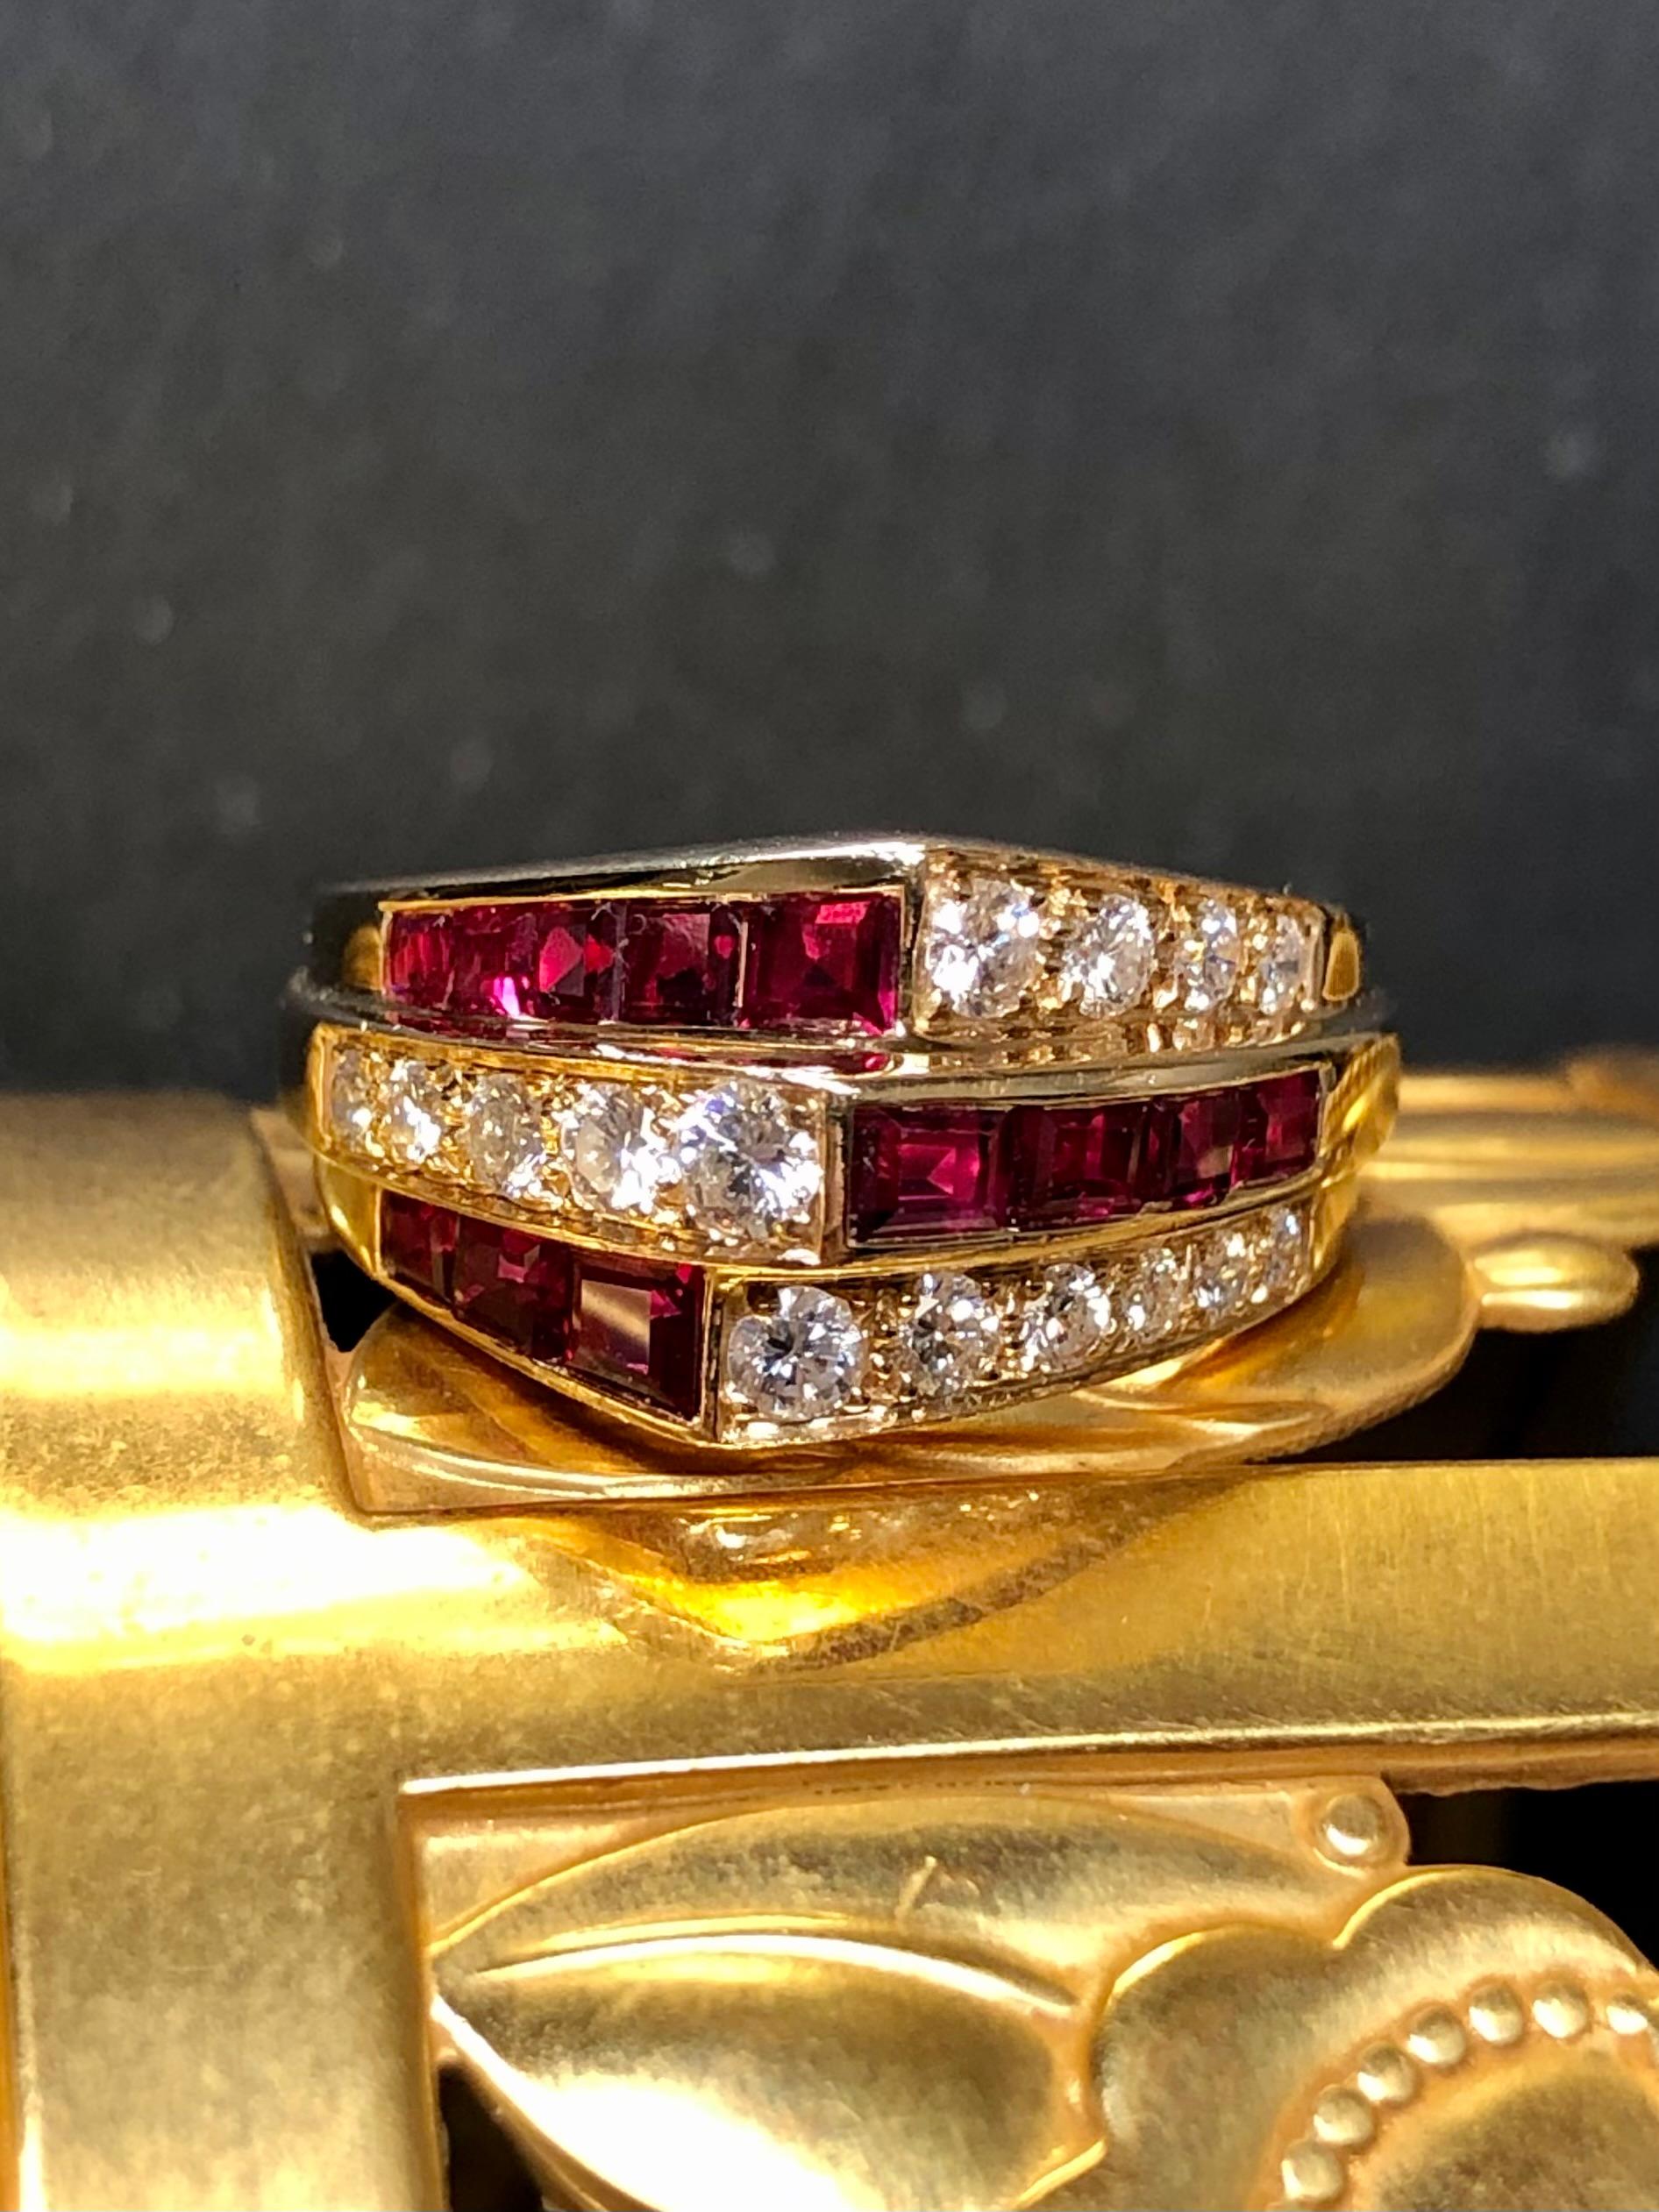 Vintage cocktail ring by Oscar Heyman done in 18K yellow gold set with 15 E-F color Vs1+ clarity diamonds as well as deep red natural calibrated rubies.


Dimensions/Weight:

Ring measures .45” wide and is size 7.25 and weighs